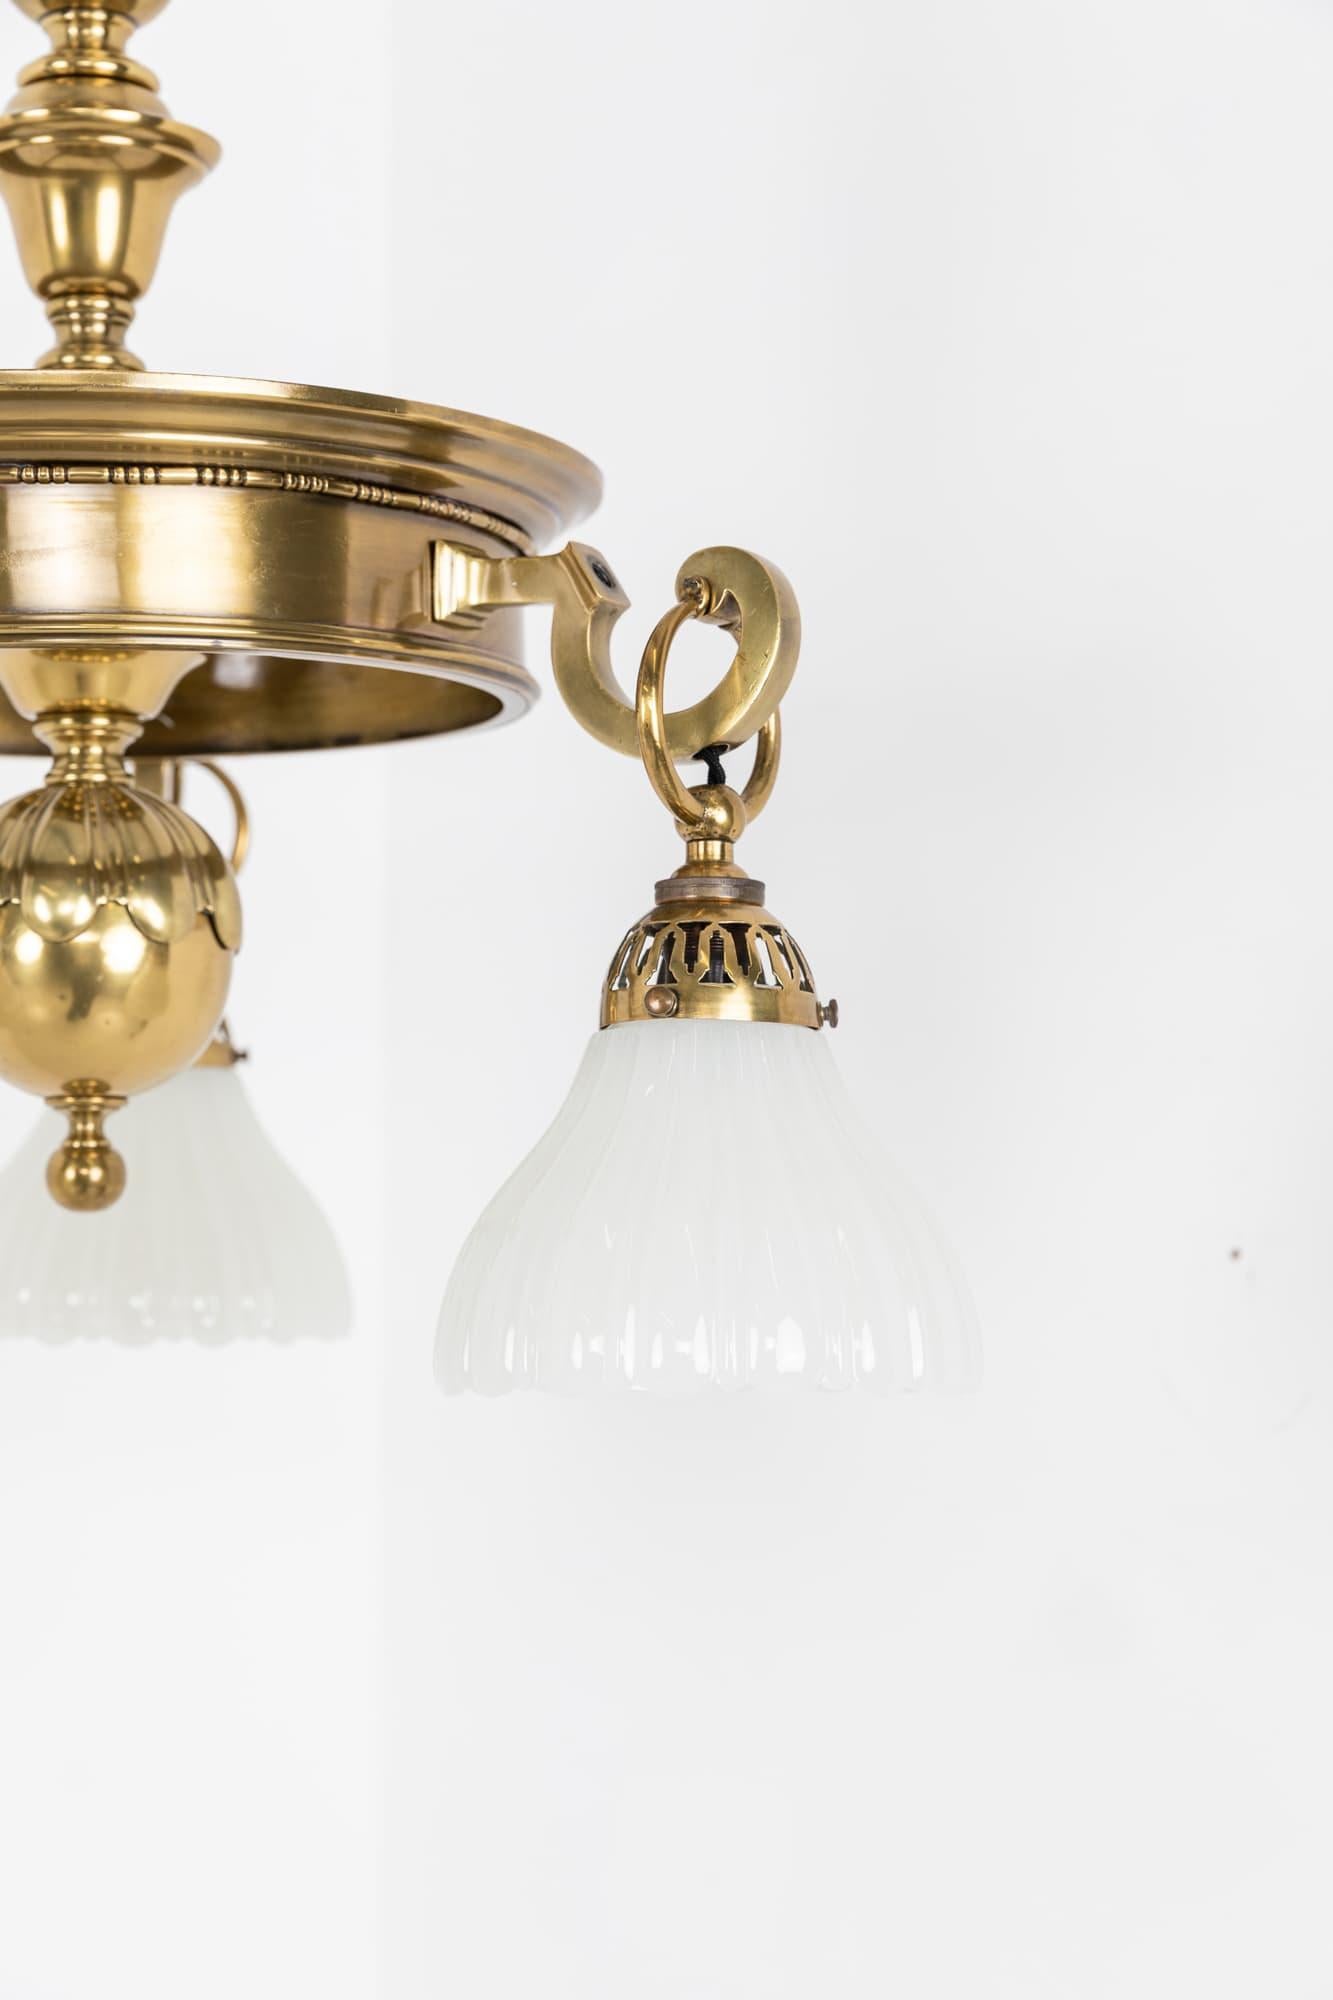 An incredibly elegant brass chandelier made in England by GEC - General Electric Company. c.1920

Heavy brass construction of a very high quality, complete with it's three perimiter pressed glass moonstone shades, ceiling loop and short length of